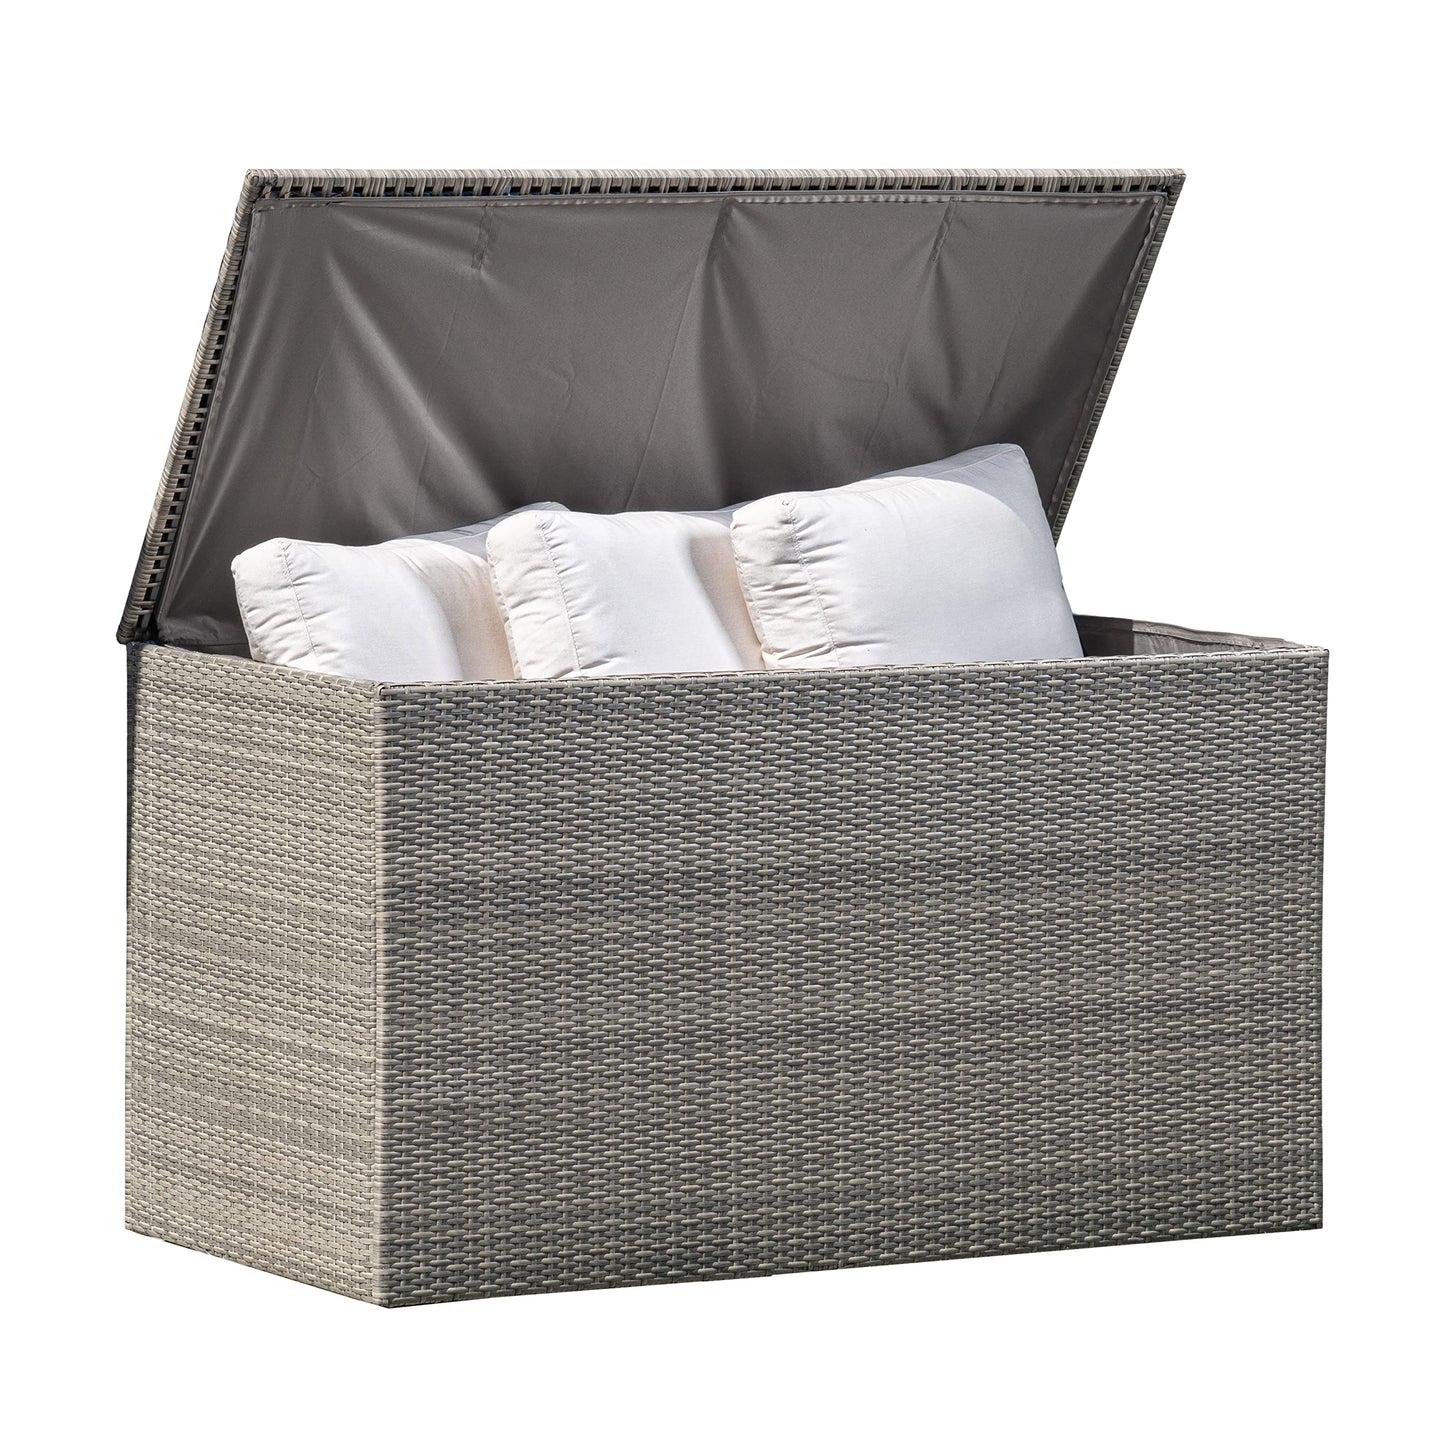 Royal Garden 230 Gal Extra Large Wicker Furniture Deck Storage Box for Indoor Outdoor Use, Storage for Cushions, Pillows, Patio, and Pool Accessories w/ Pneumatic Hinges and Internal Liner (Gray) Gray